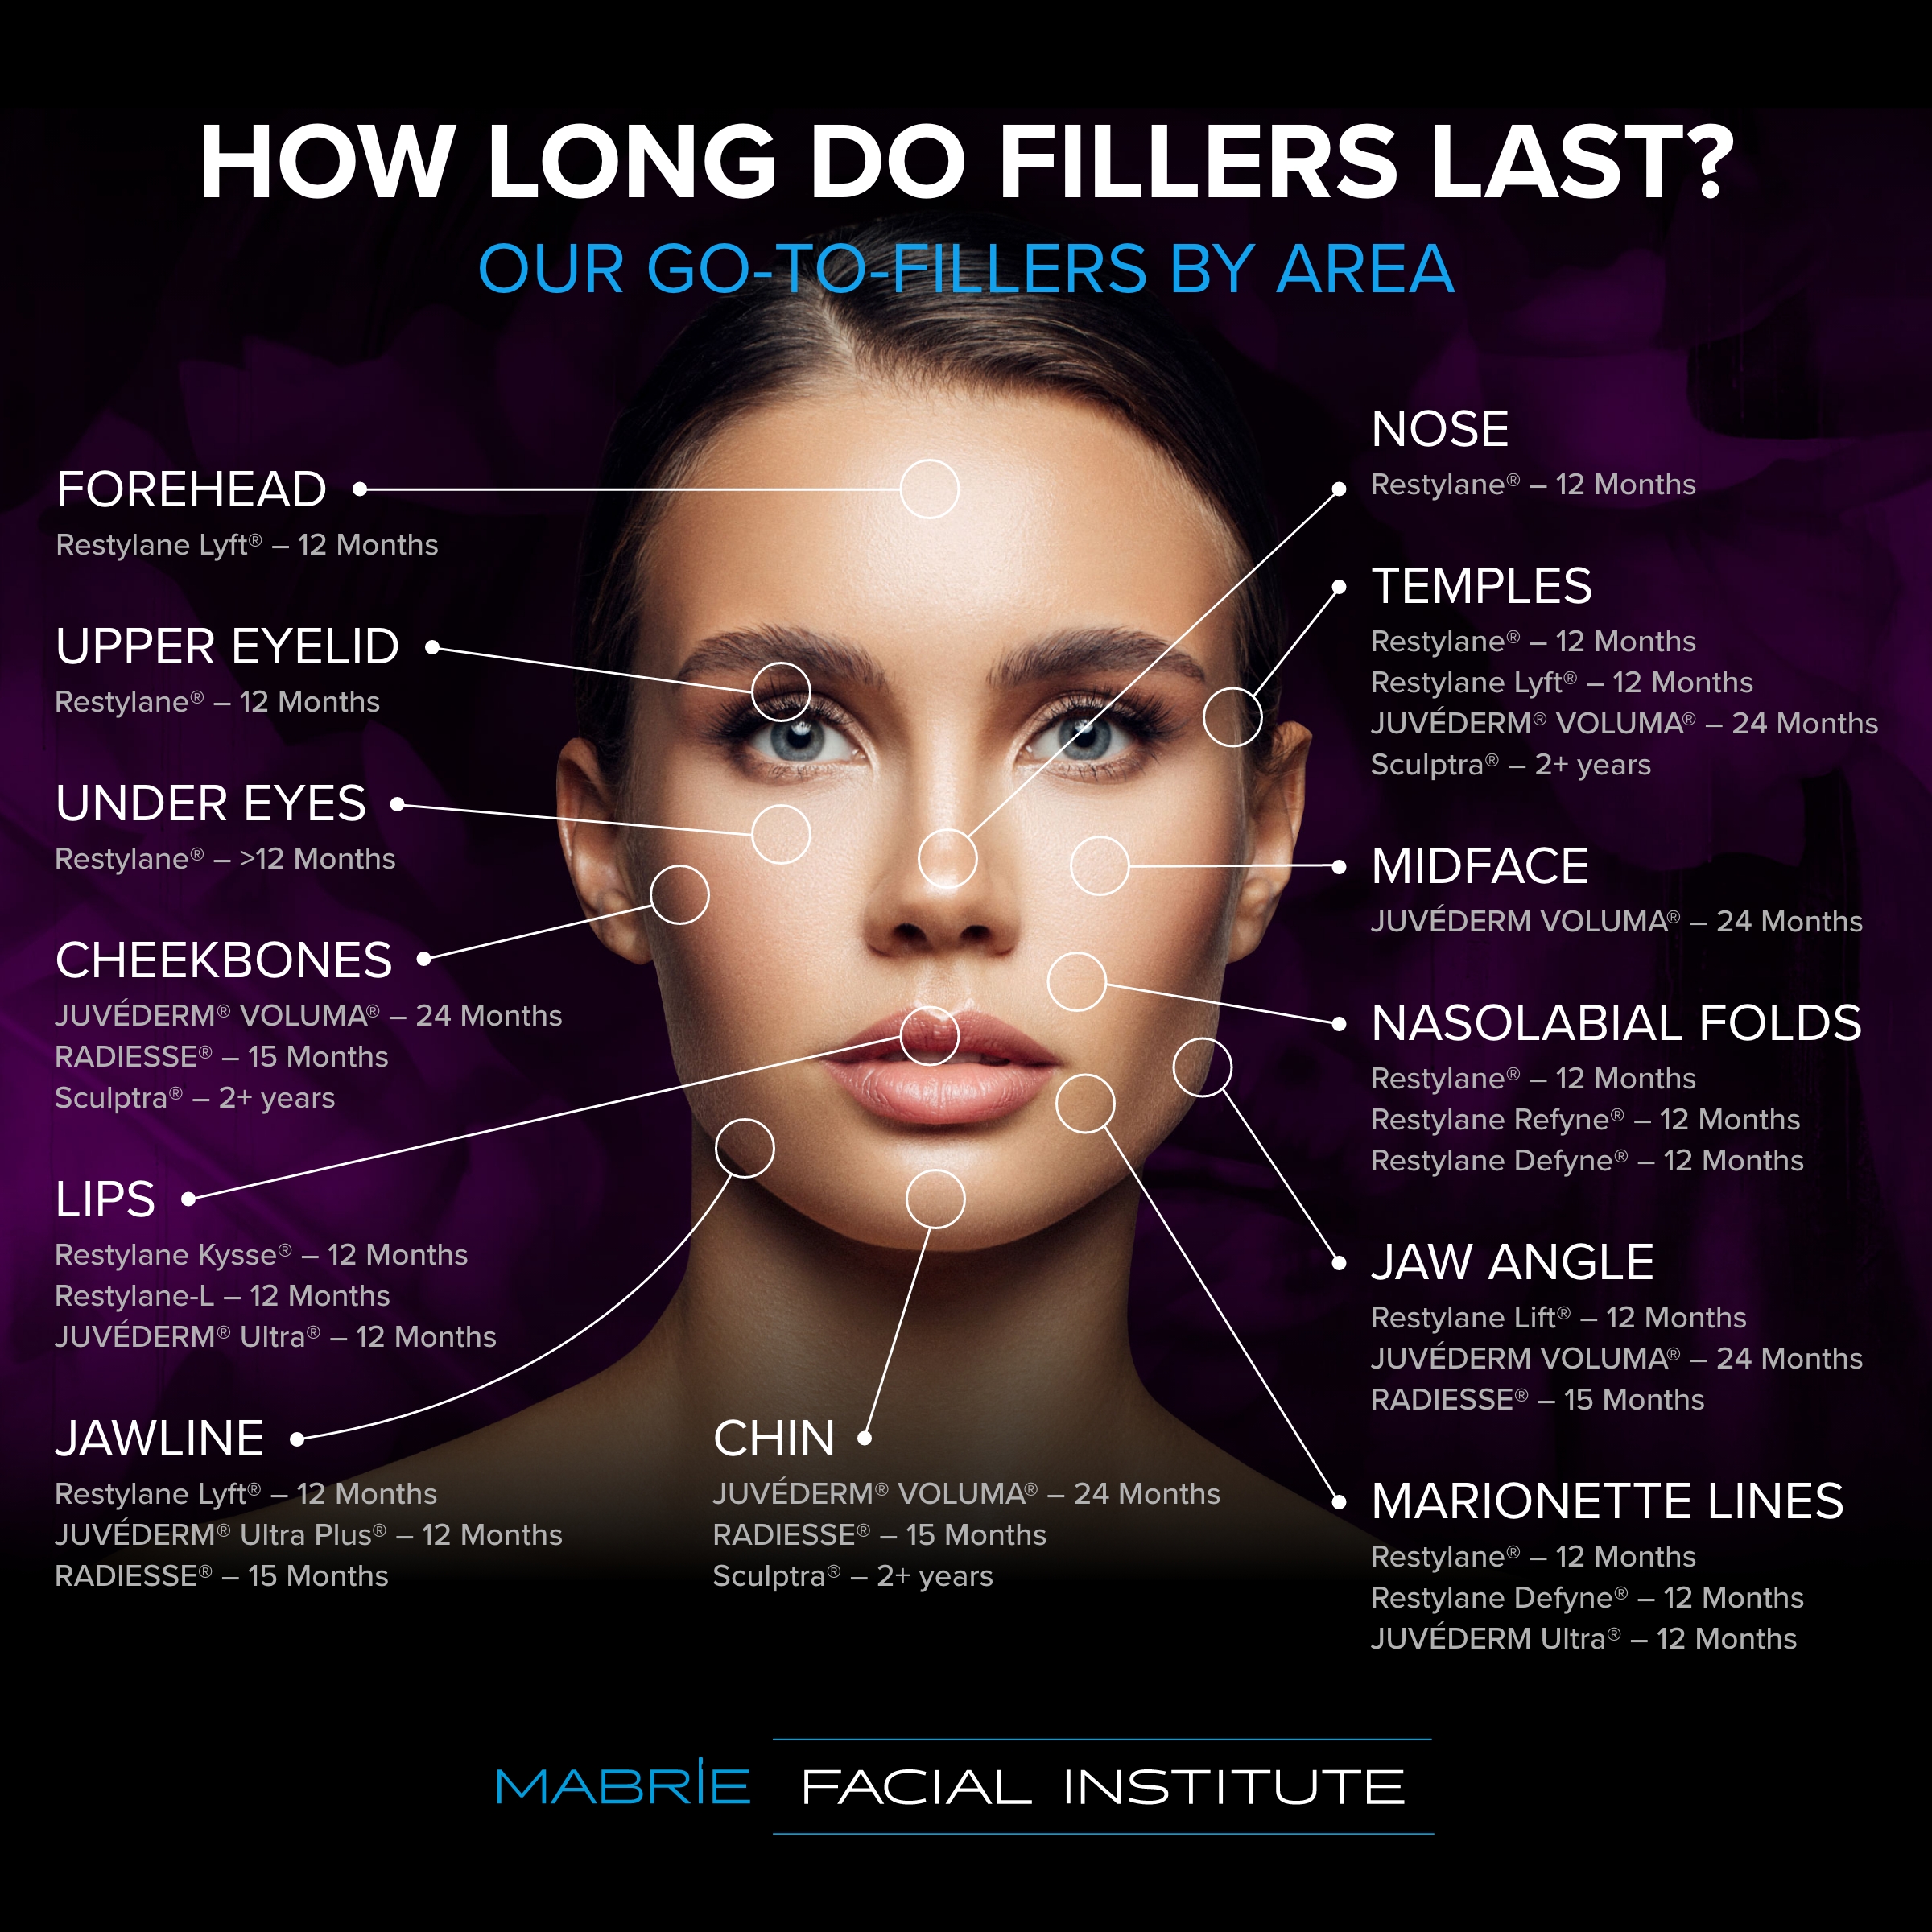 A diagram illustrating how long a specific filler procedure will last on a given treatment area